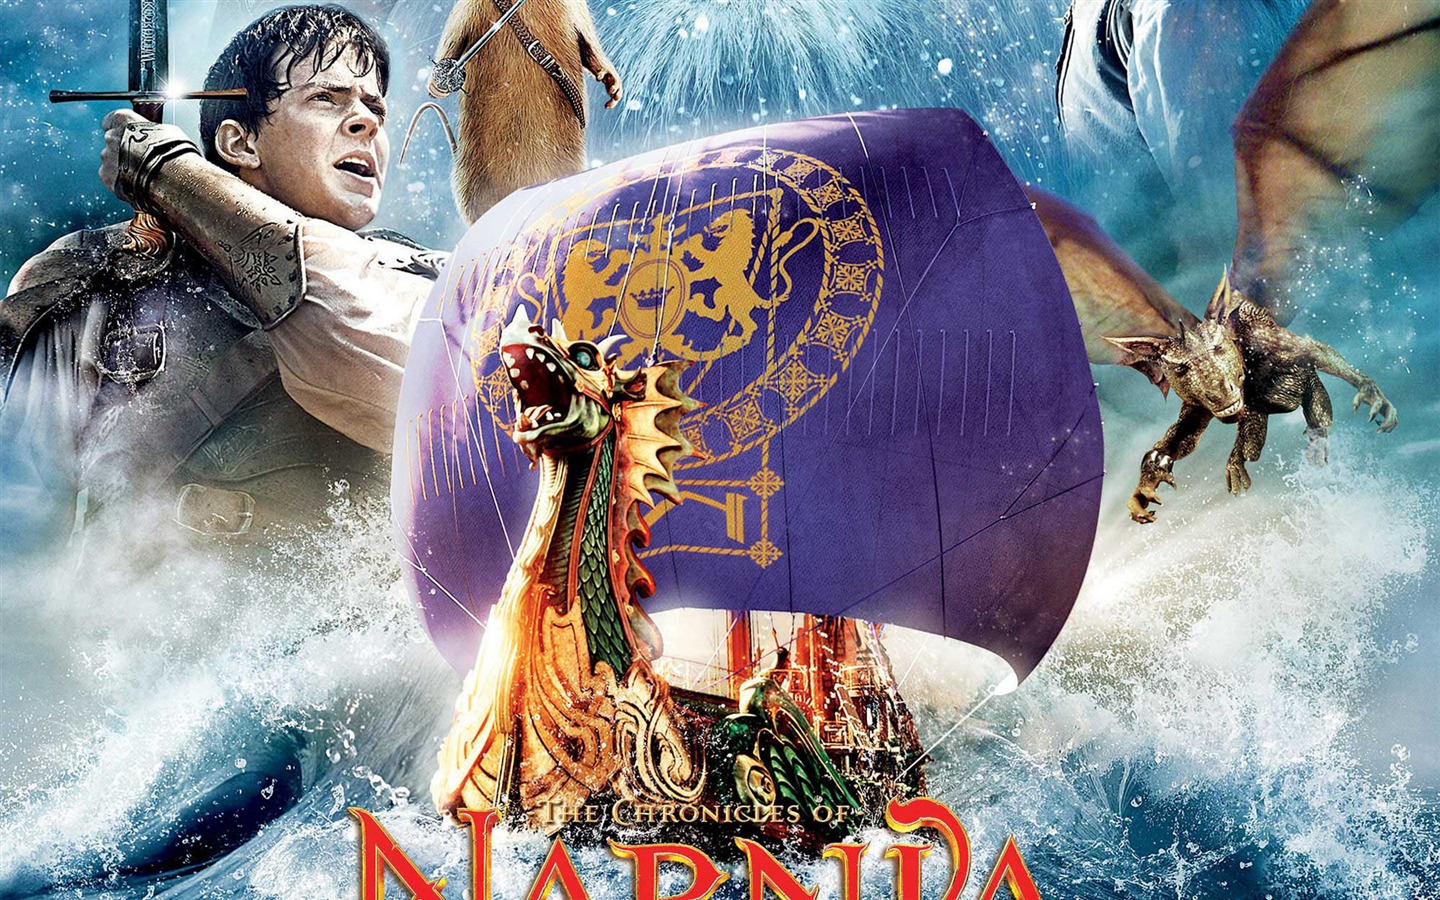 The Chronicles of Narnia: The Voyage of the Dawn Treader wallpapers #1 - 1440x900